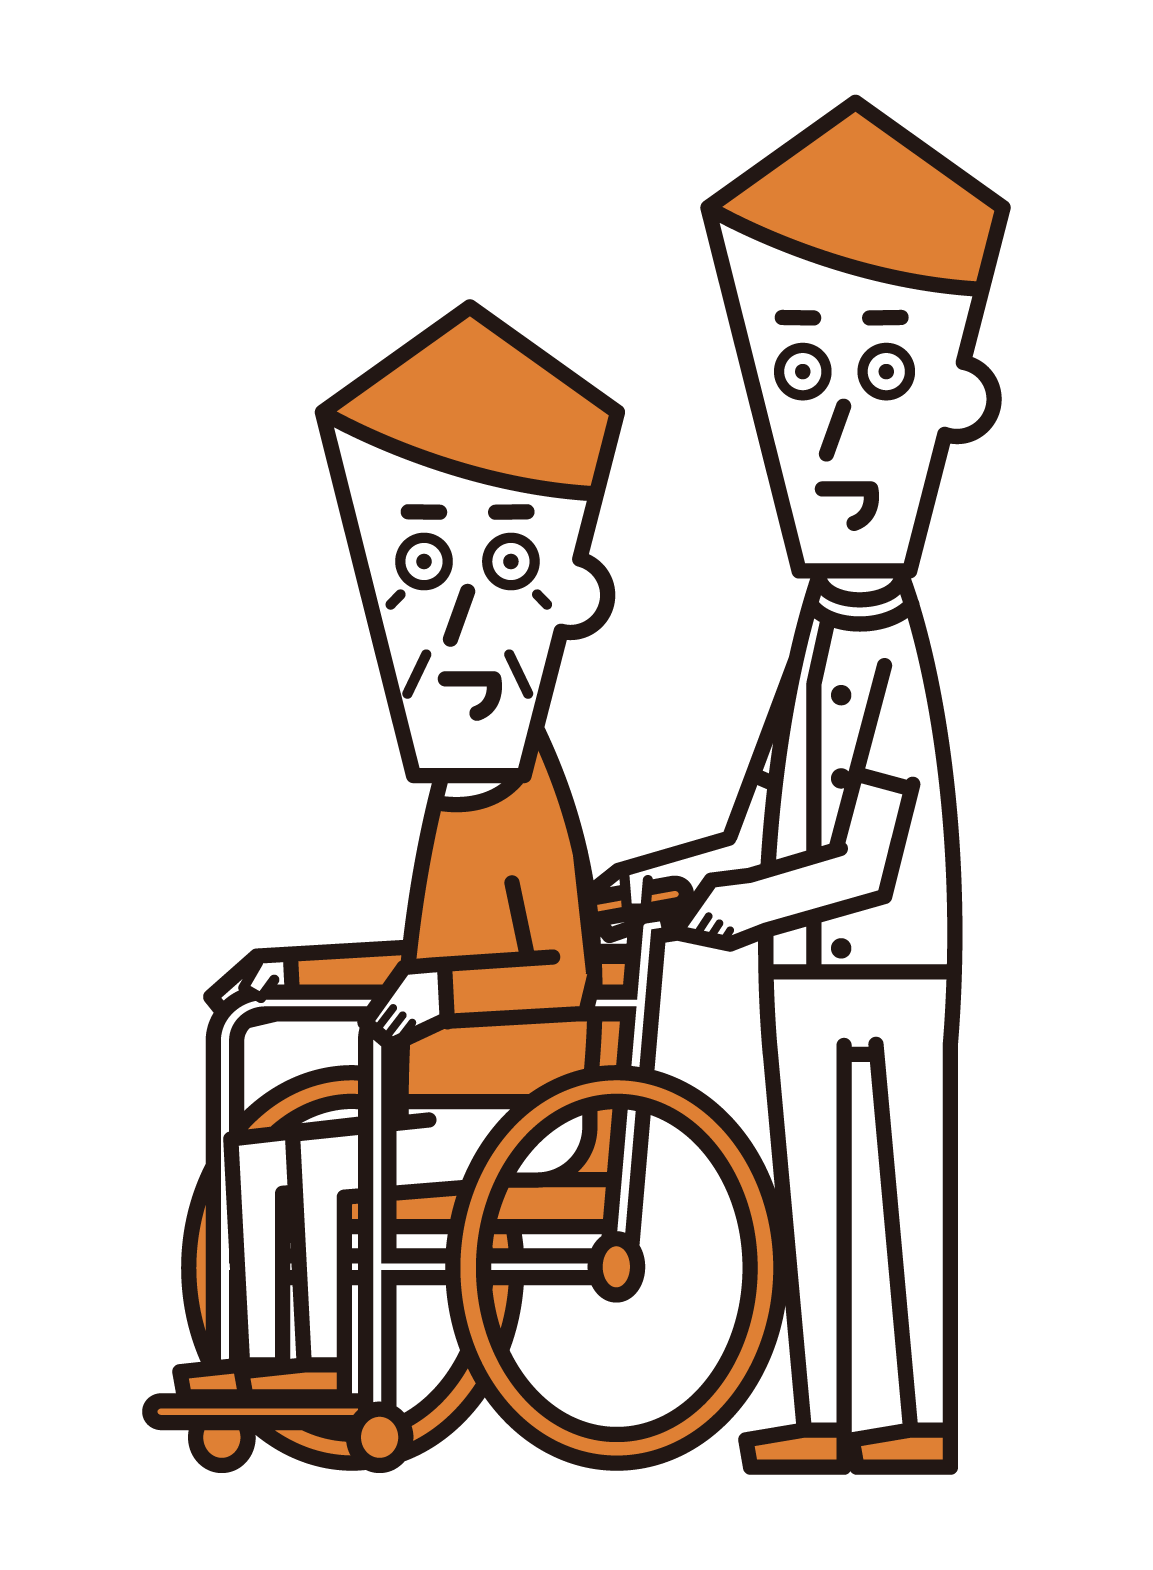 Illustration of a care worker (male) pushing a wheelchair